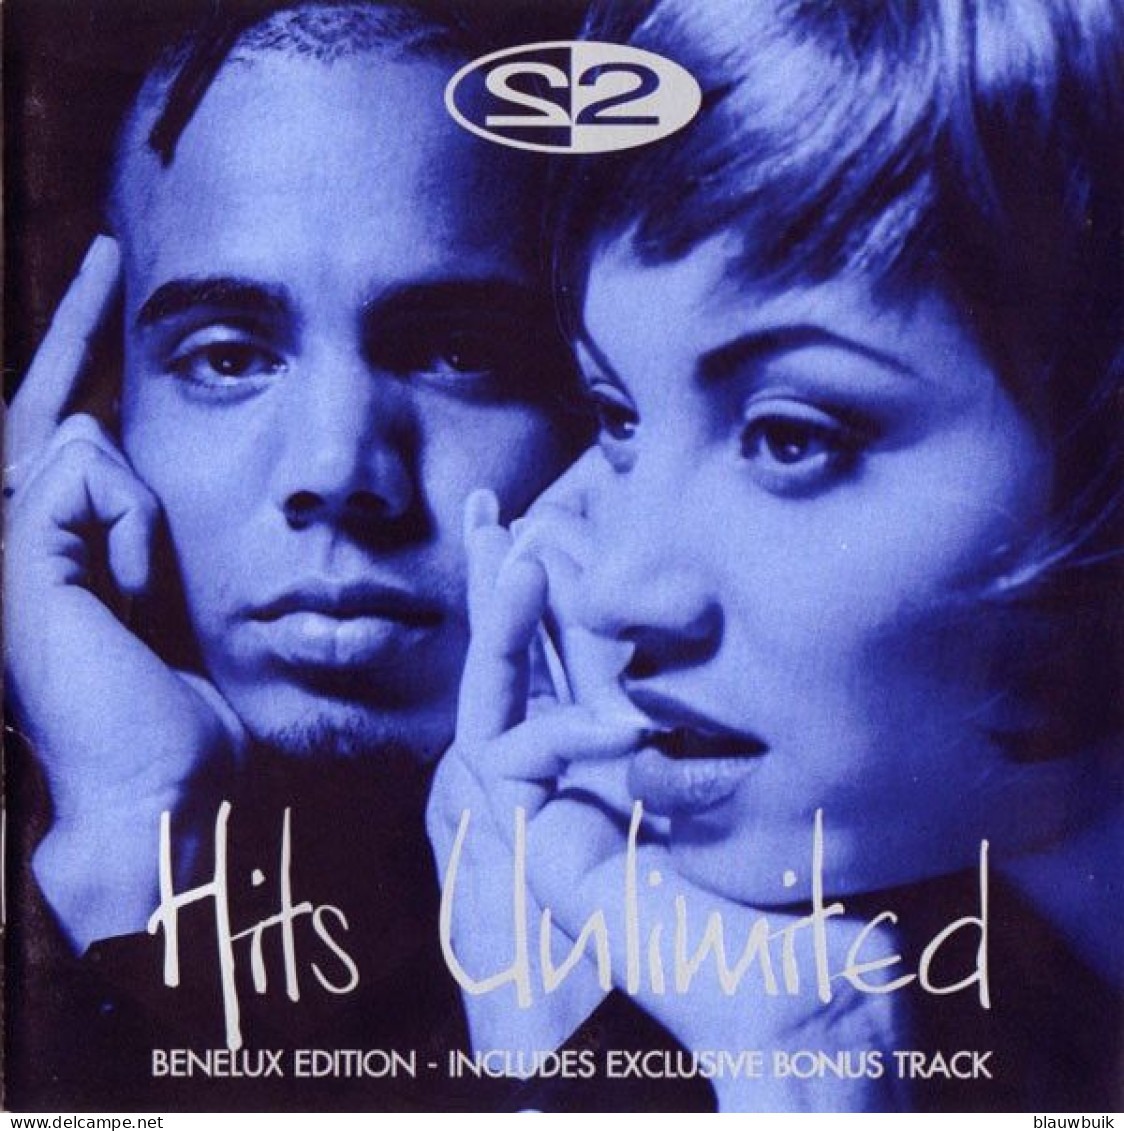 1x CD 2 Unlimited – Hits Unlimited - Sonstige - Englische Musik